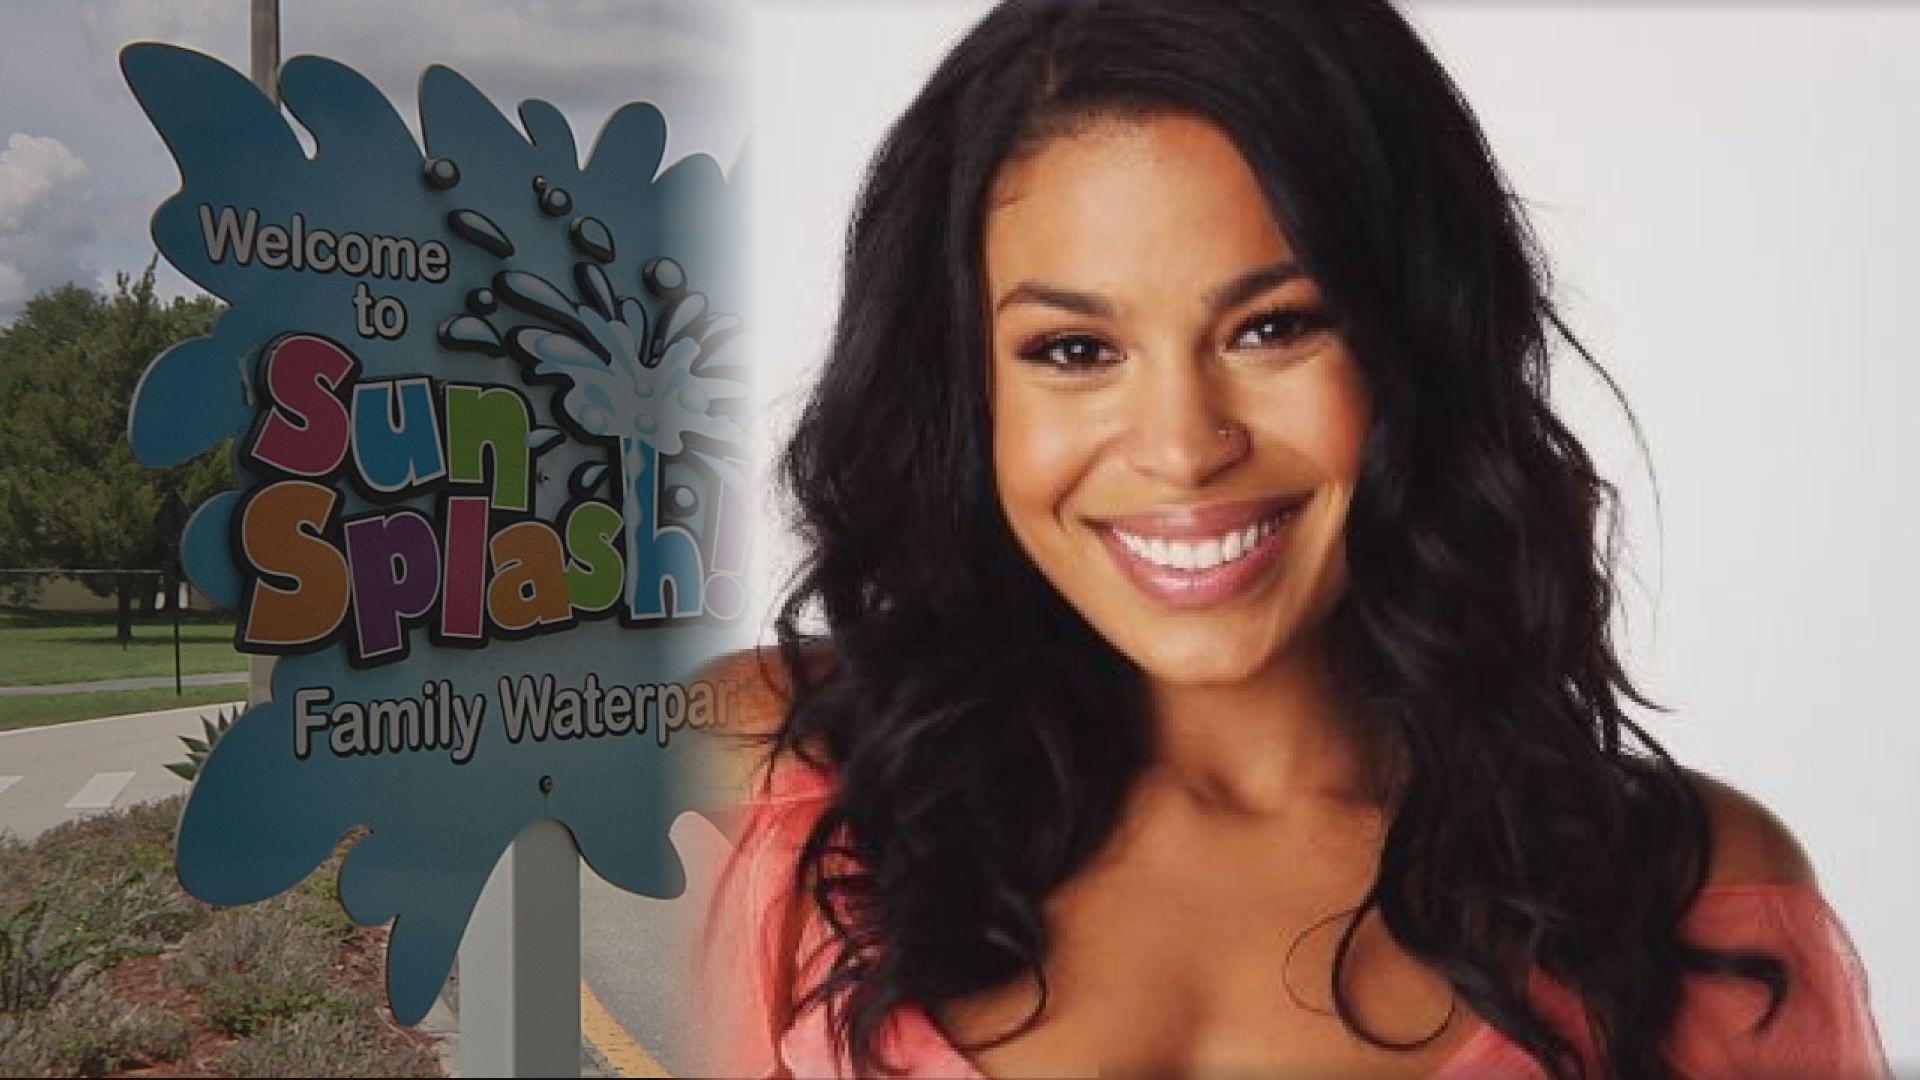 Jordin Sparks scheduled to perform at new teen party in Cape Coral